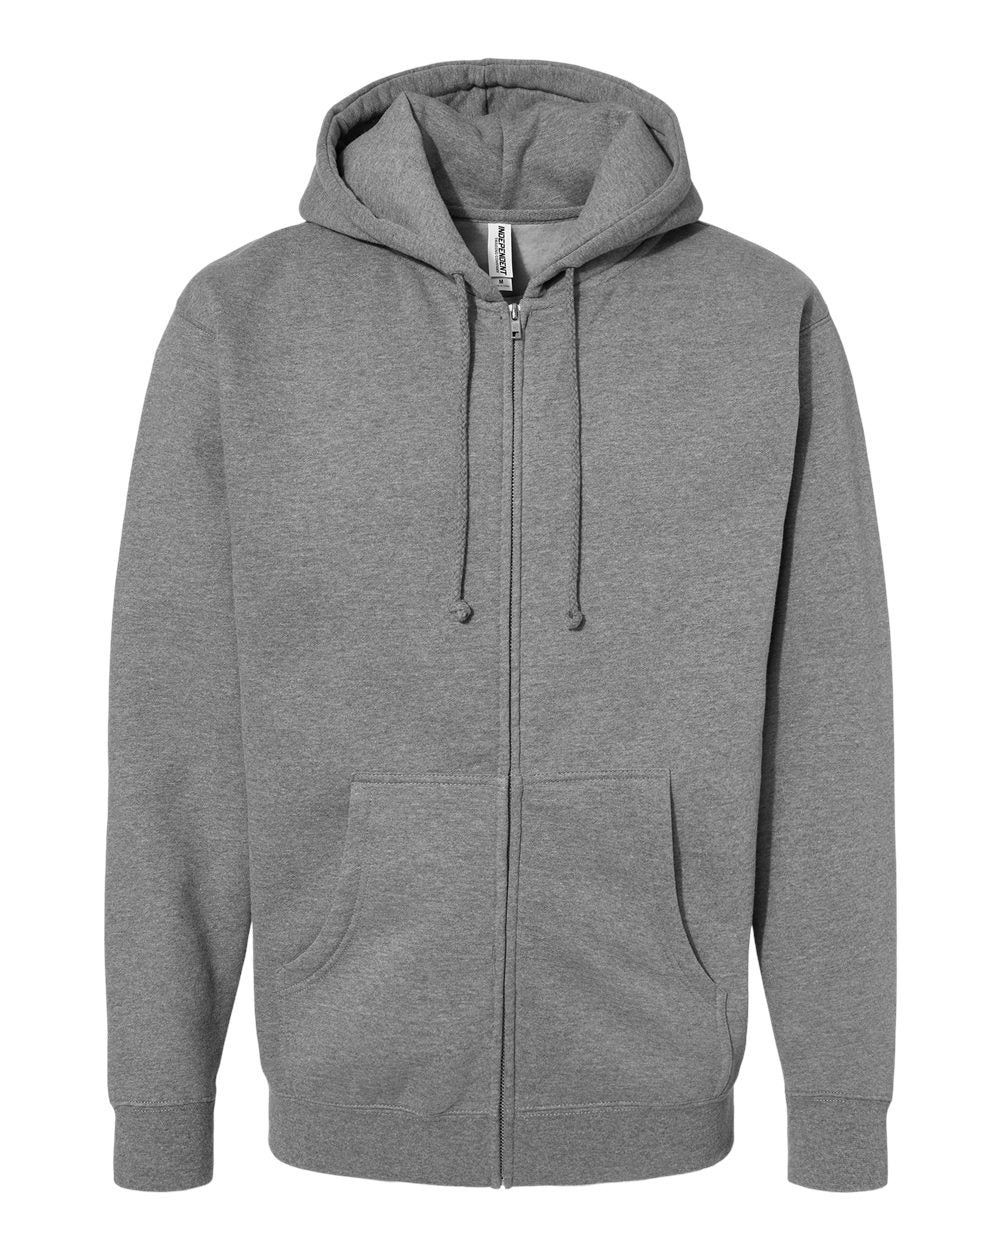 Independent Trading Co. Heavyweight Full-Zip Hooded Sweatshirt IND4000Z #color_Gunmetal Heather